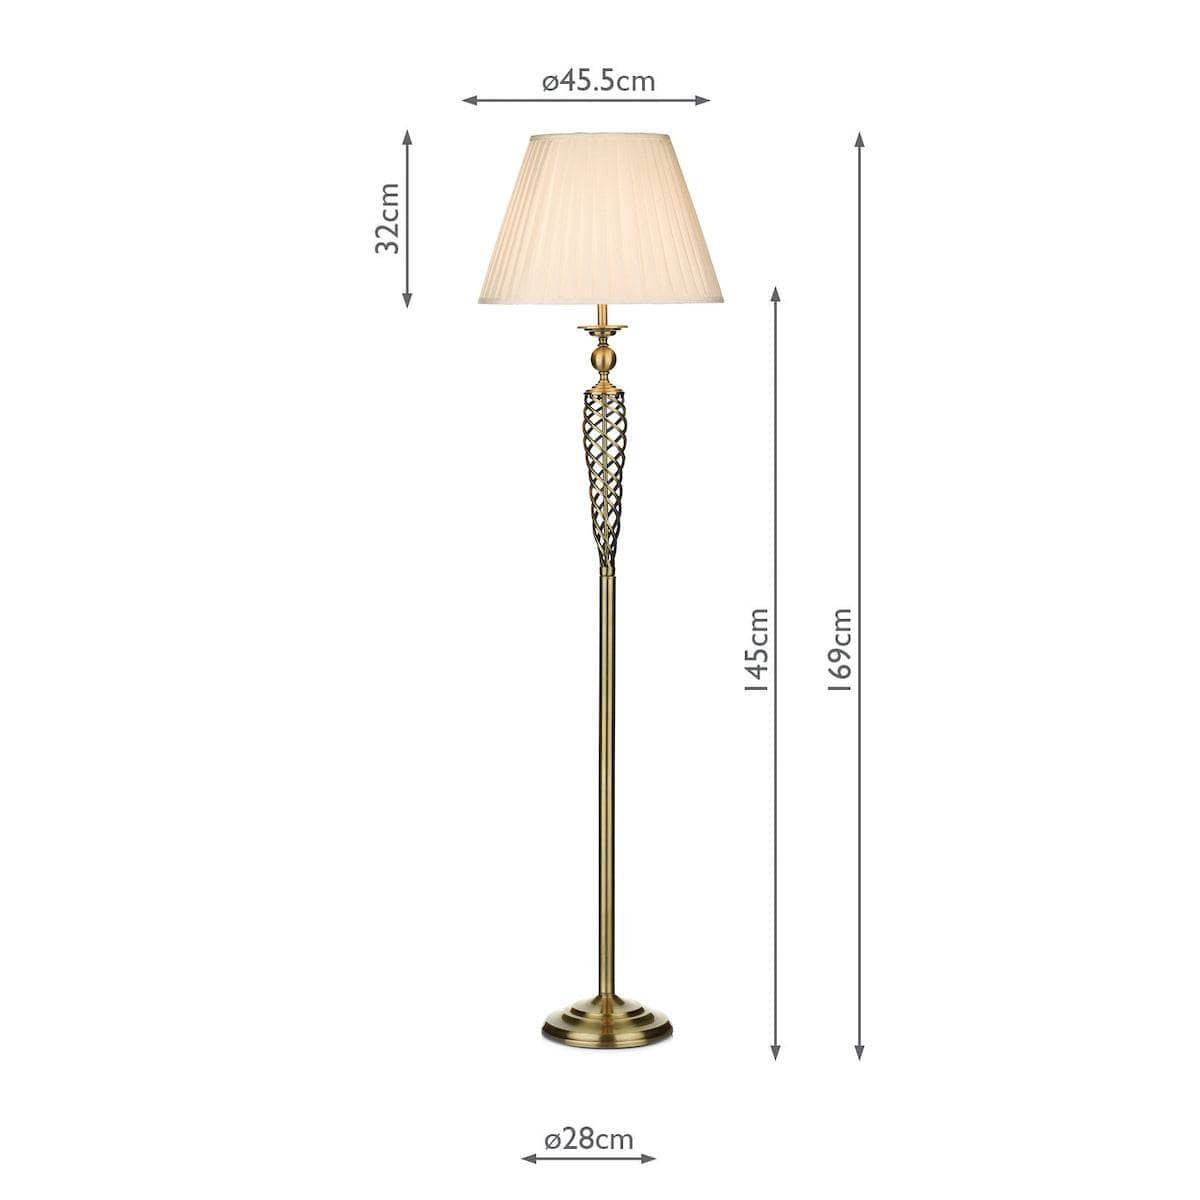 Lights  -  Siam Floor Lamp Complete With Shade Antique Brass  -  50085212